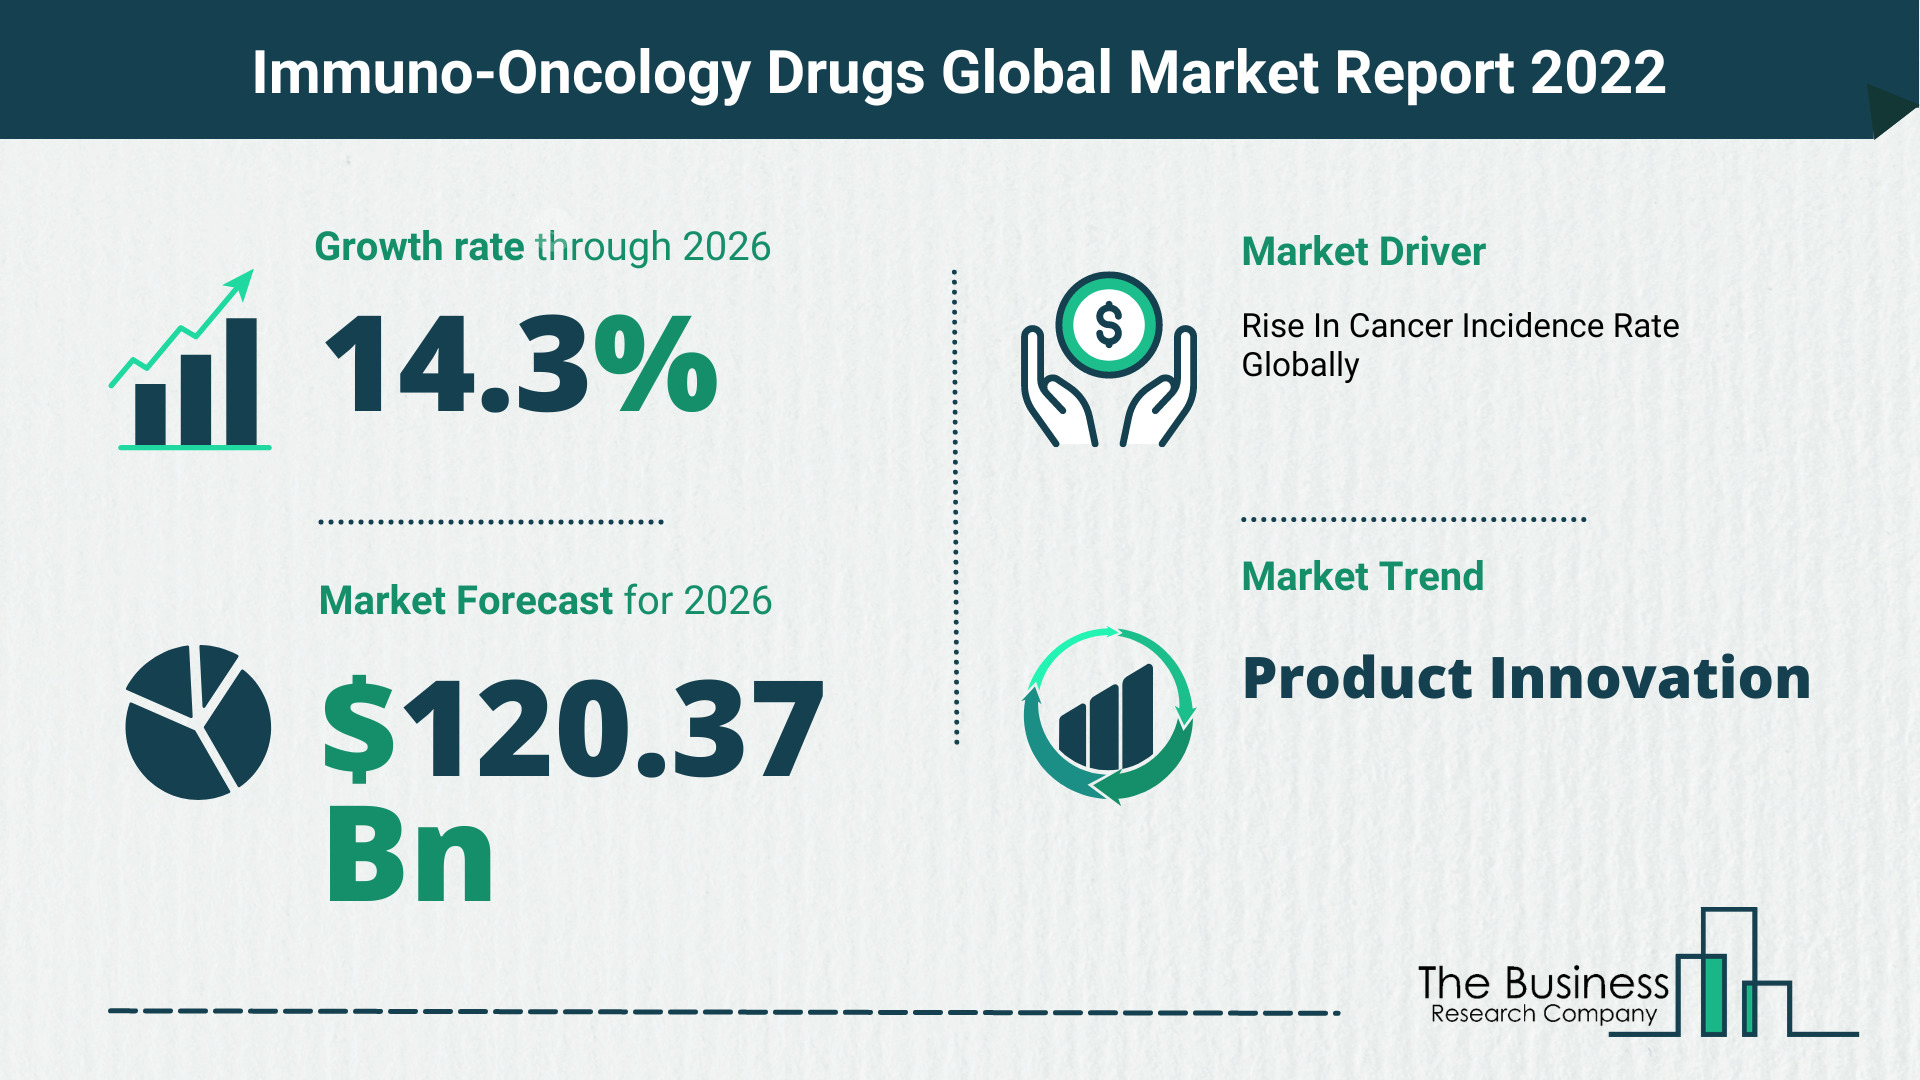 What Is The Immuno-Oncology Drugs Market Overview In 2022?